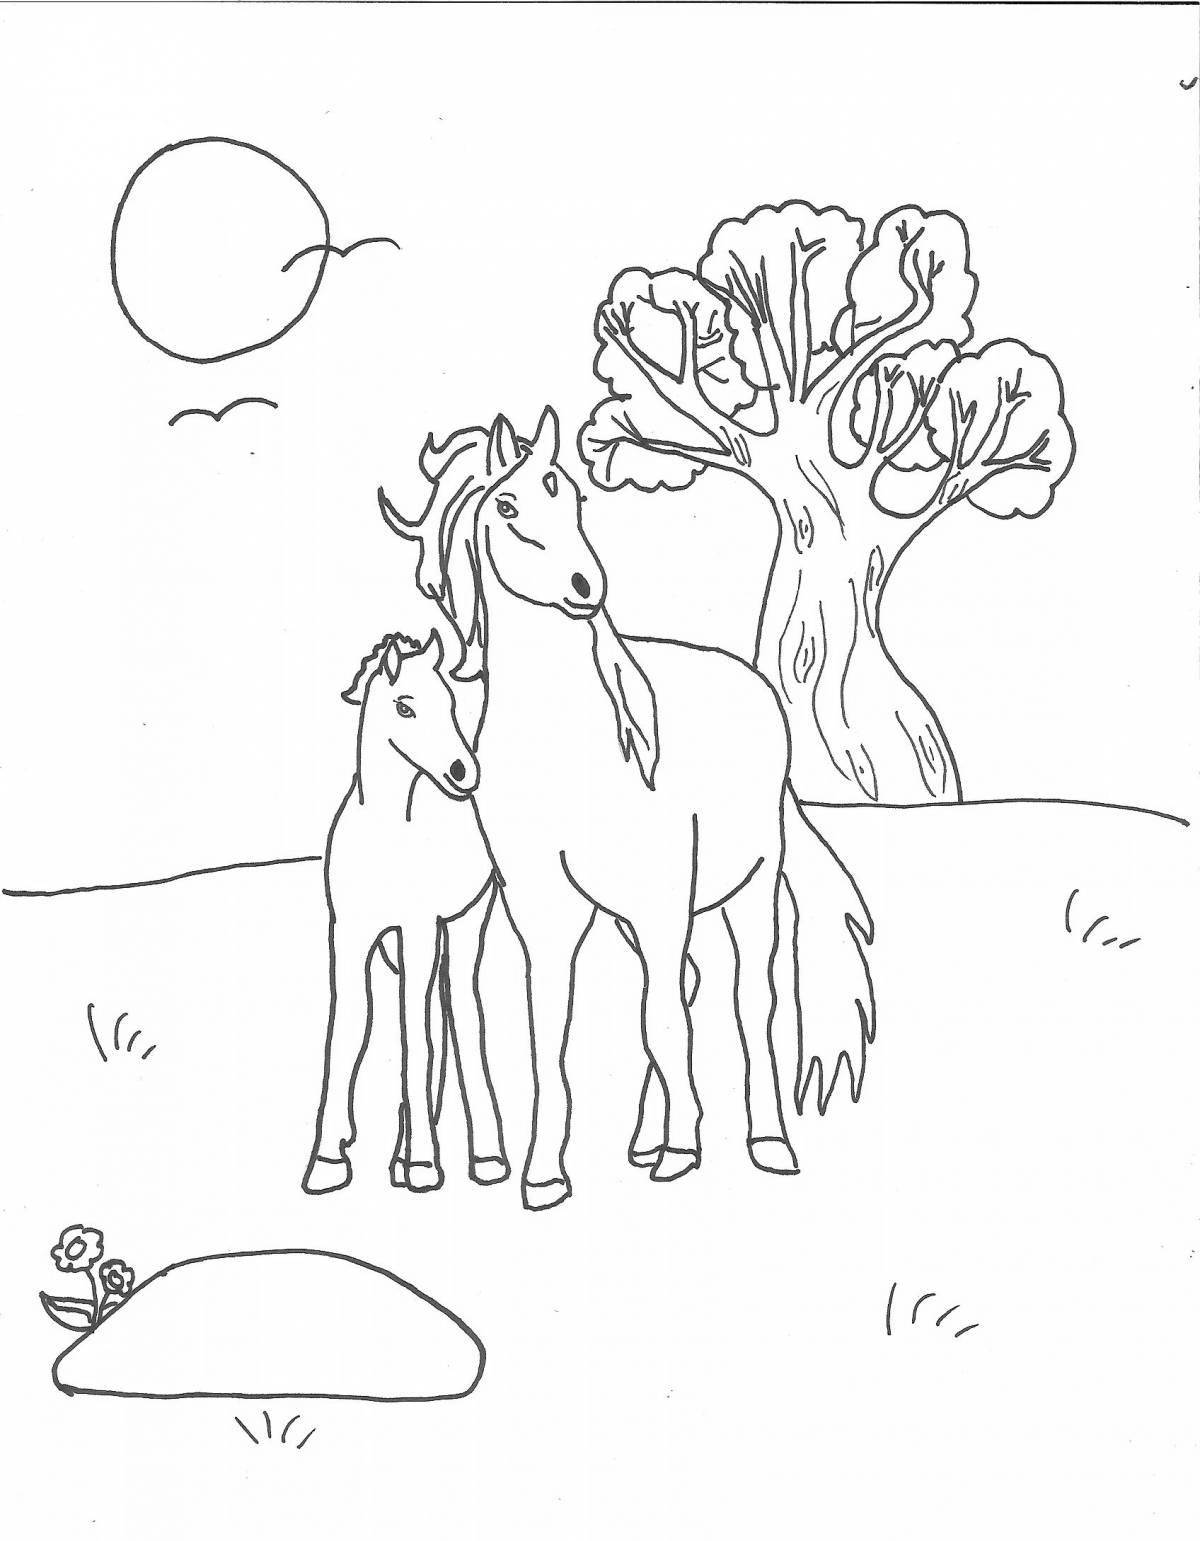 Exalted horse family coloring page